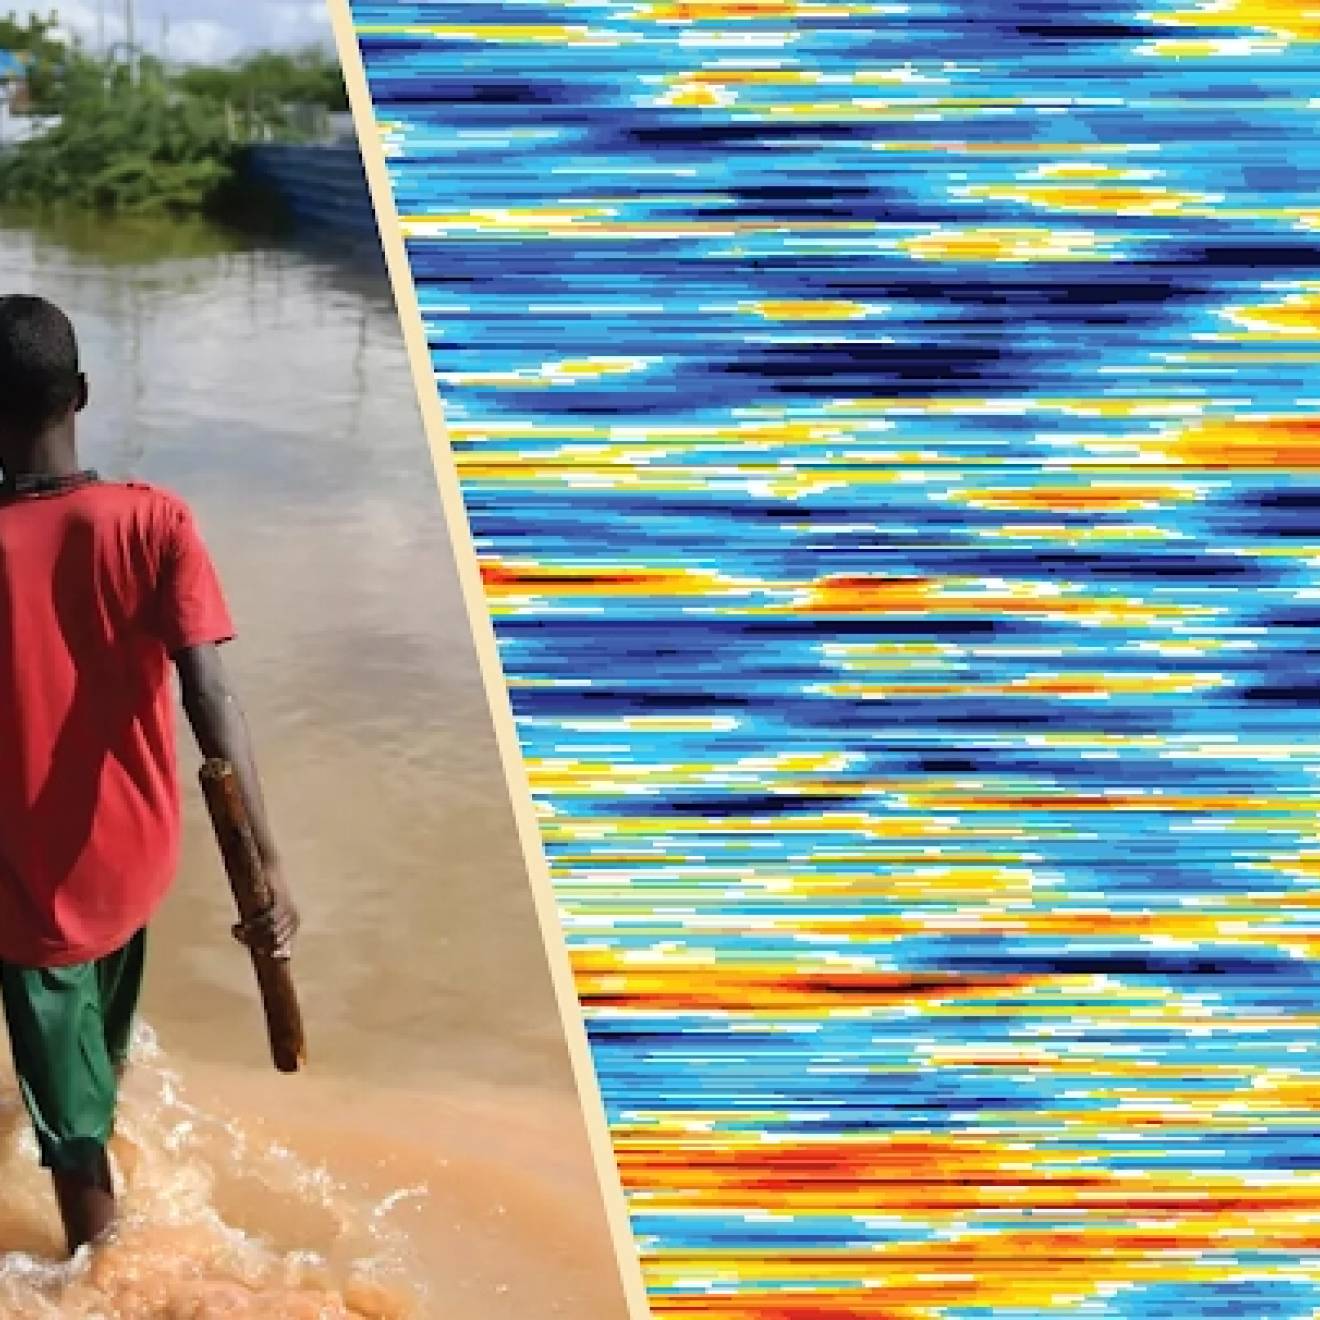 Two East African youths walk through a flooded street, with a weather heatmap juxtaposed on the right side of the image